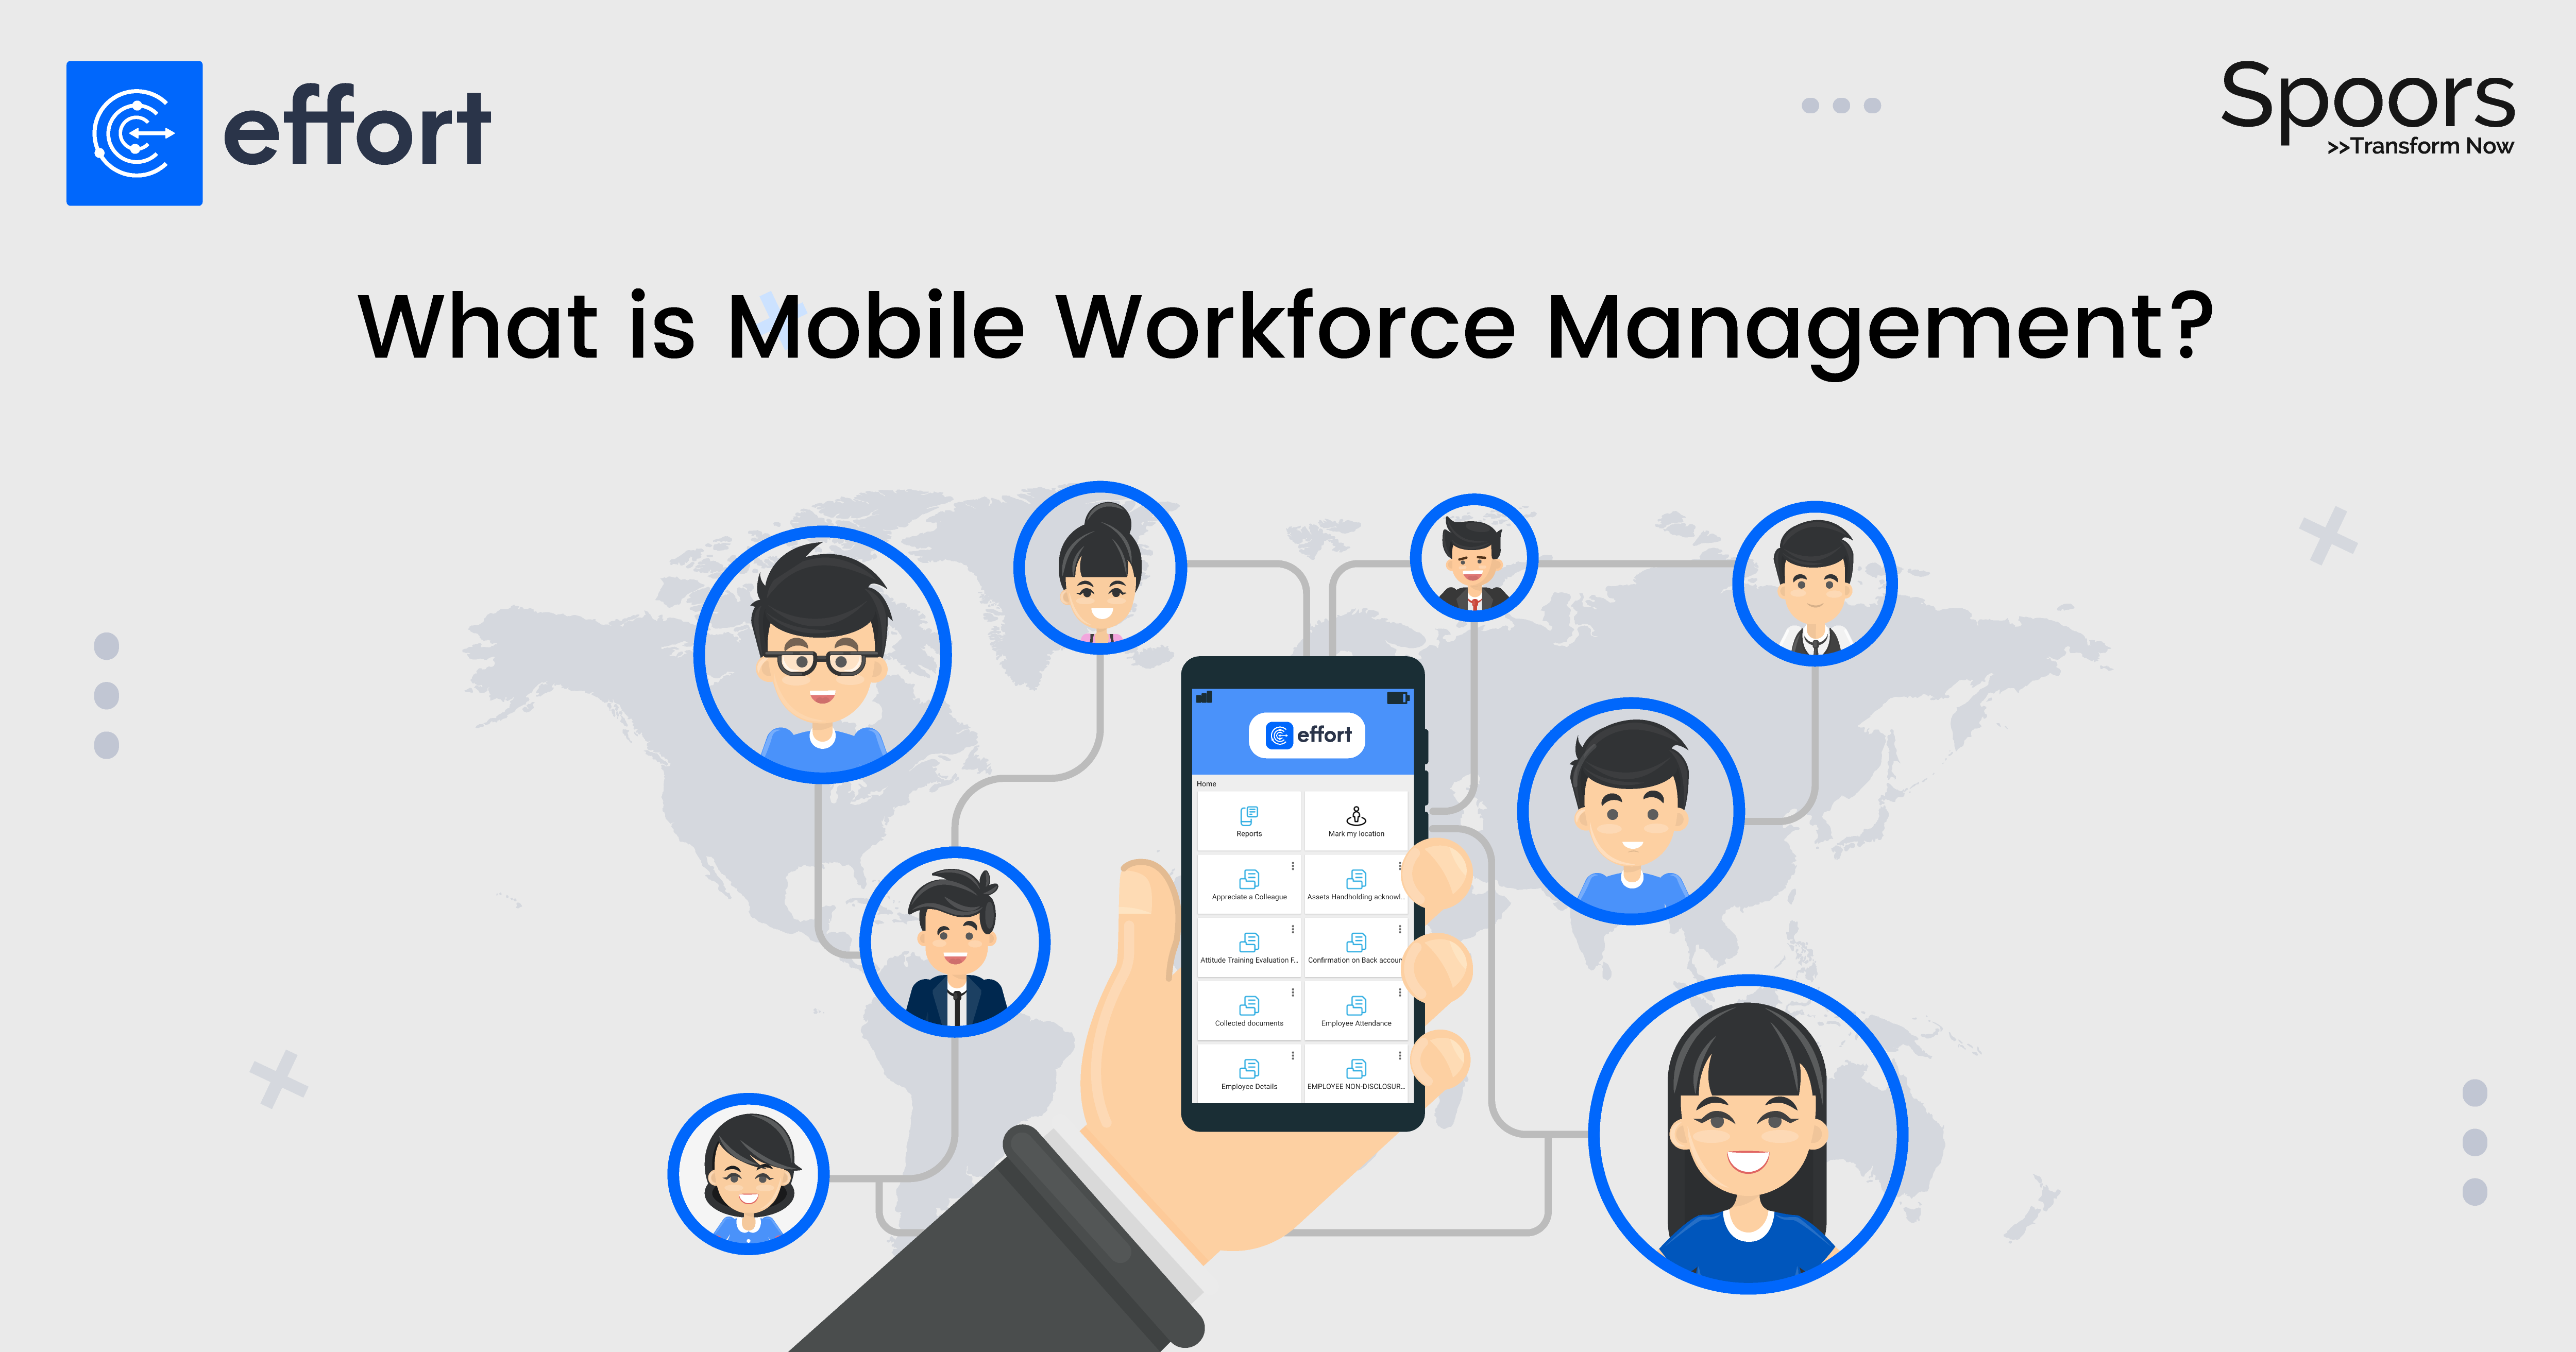 What is Mobile Workforce Management?